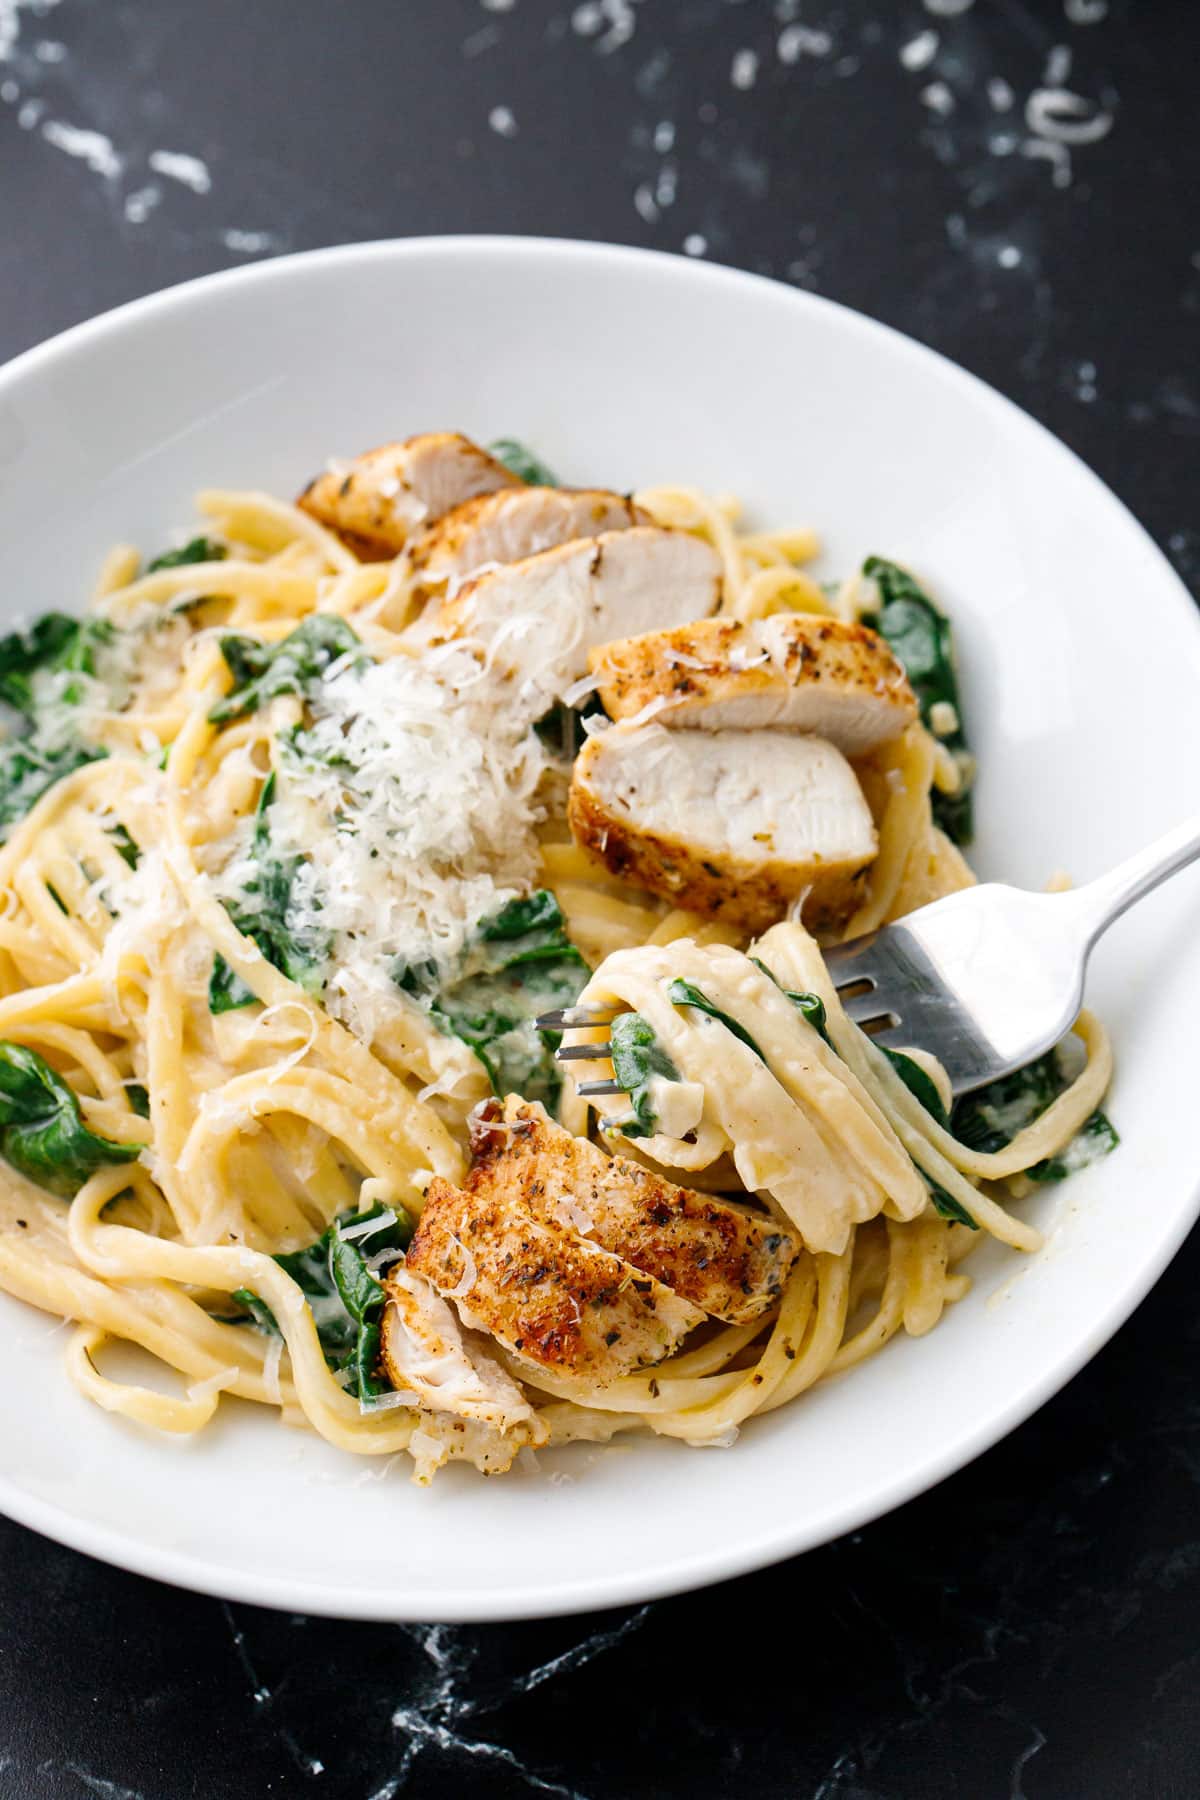 Fork with a twirl of linguine pasta showing the creamy sauce, plus visible bits of wilted spinach and pieces of seasoned chicken mixed in.